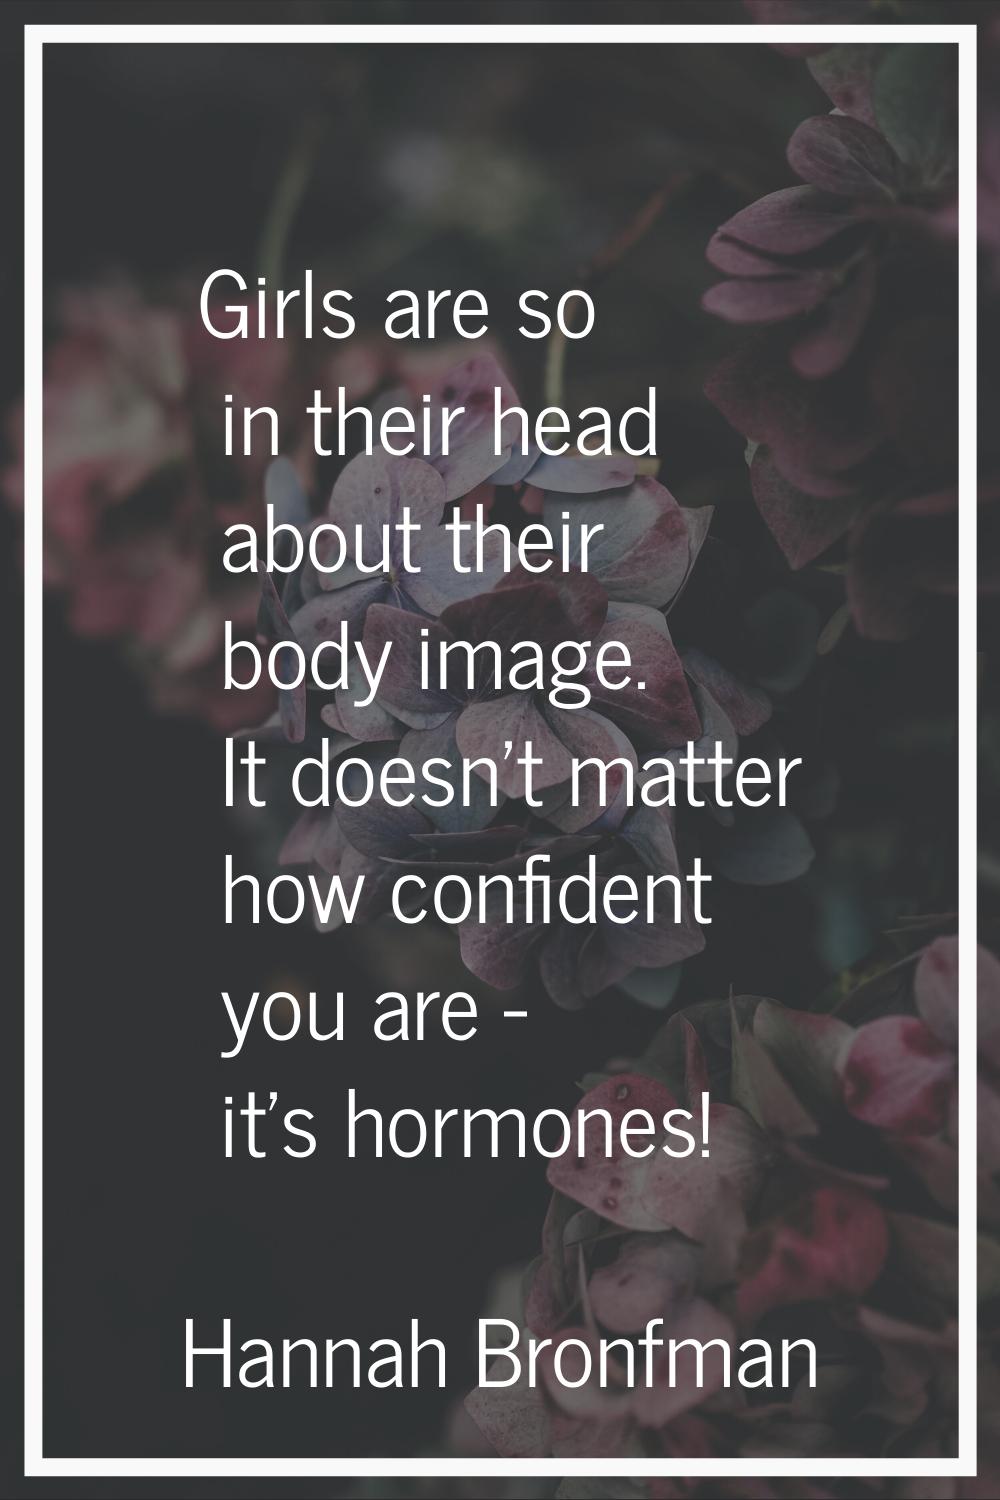 Girls are so in their head about their body image. It doesn't matter how confident you are - it's h